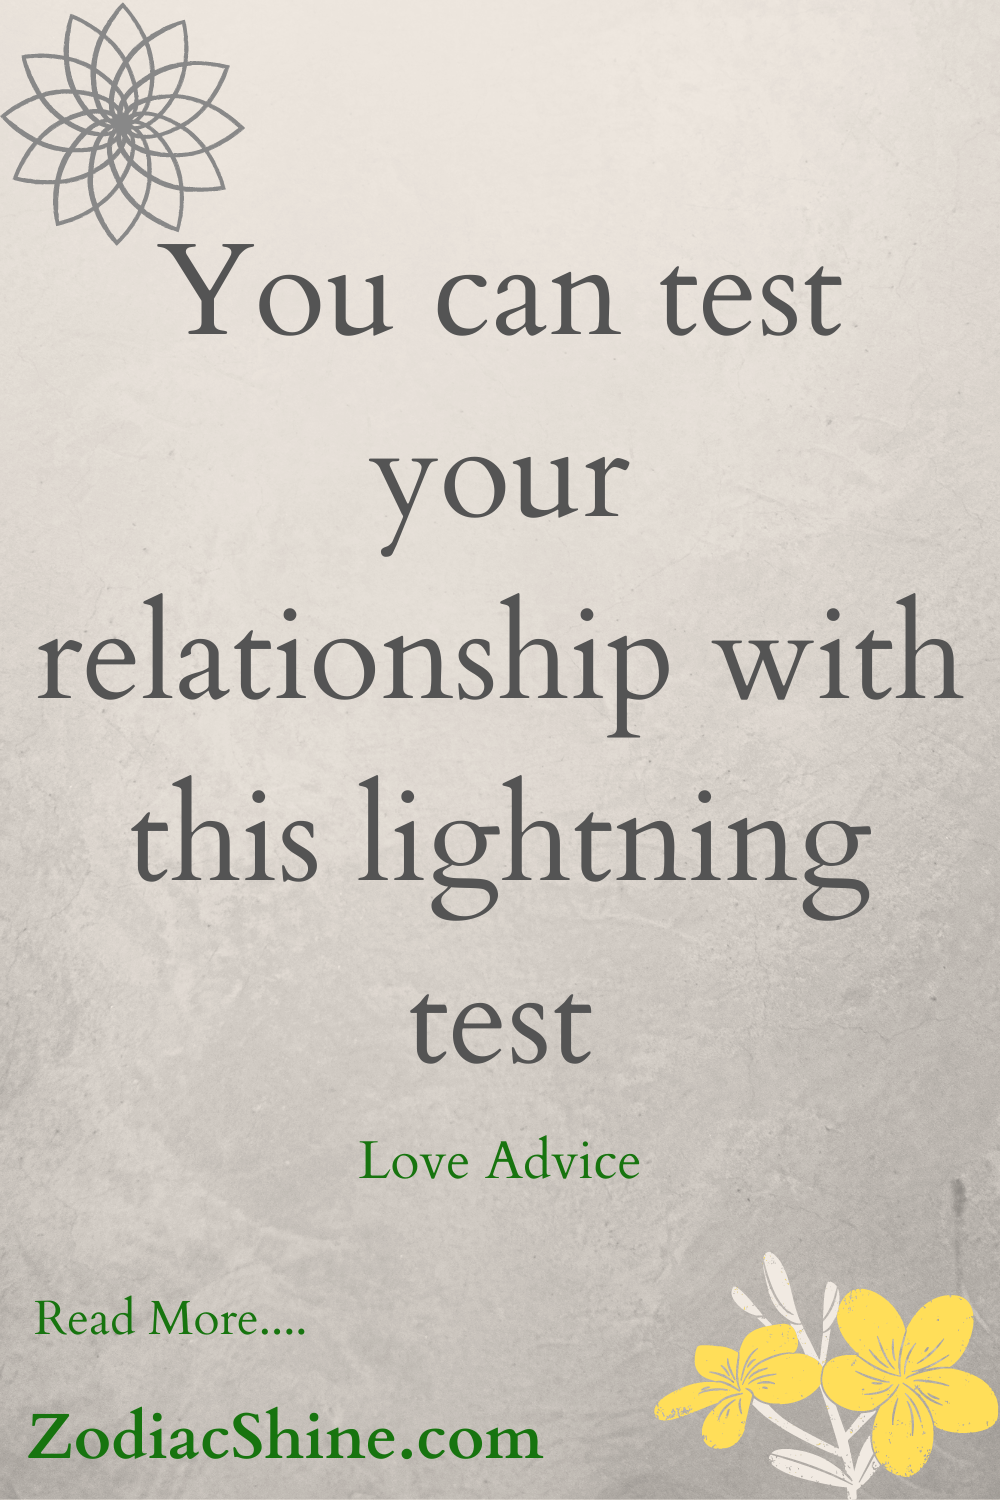 You can test your relationship with this lightning test